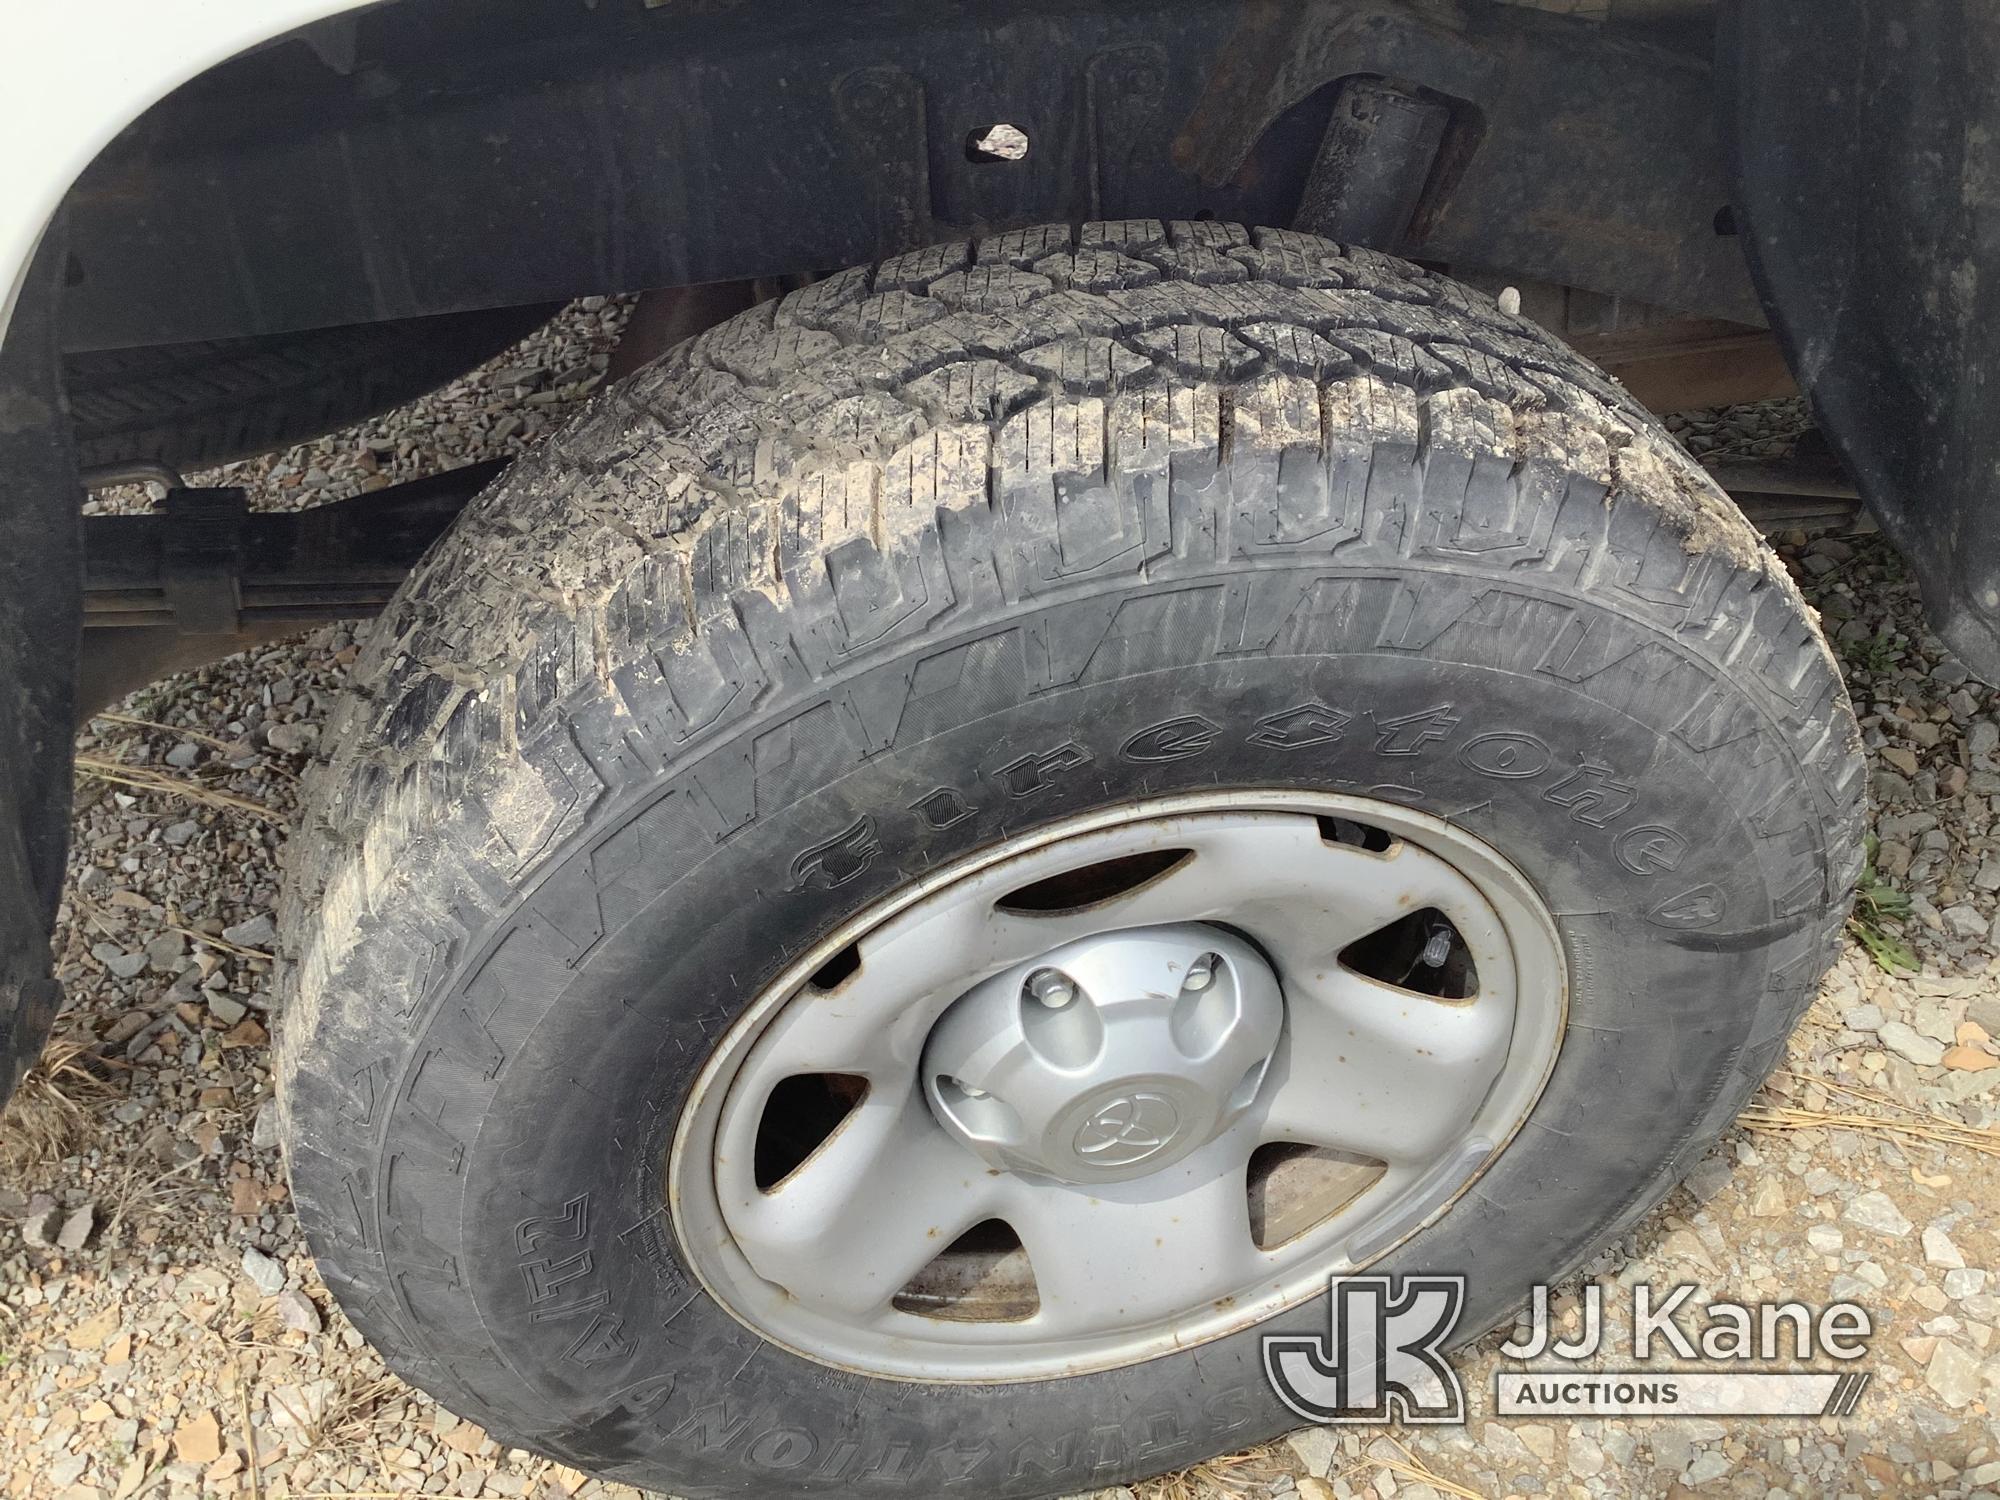 (Smock, PA) 2018 Toyota Tacoma 4x4 Extended-Cab Pickup Truck Not Running, Bad Engine, Rust, Paint &